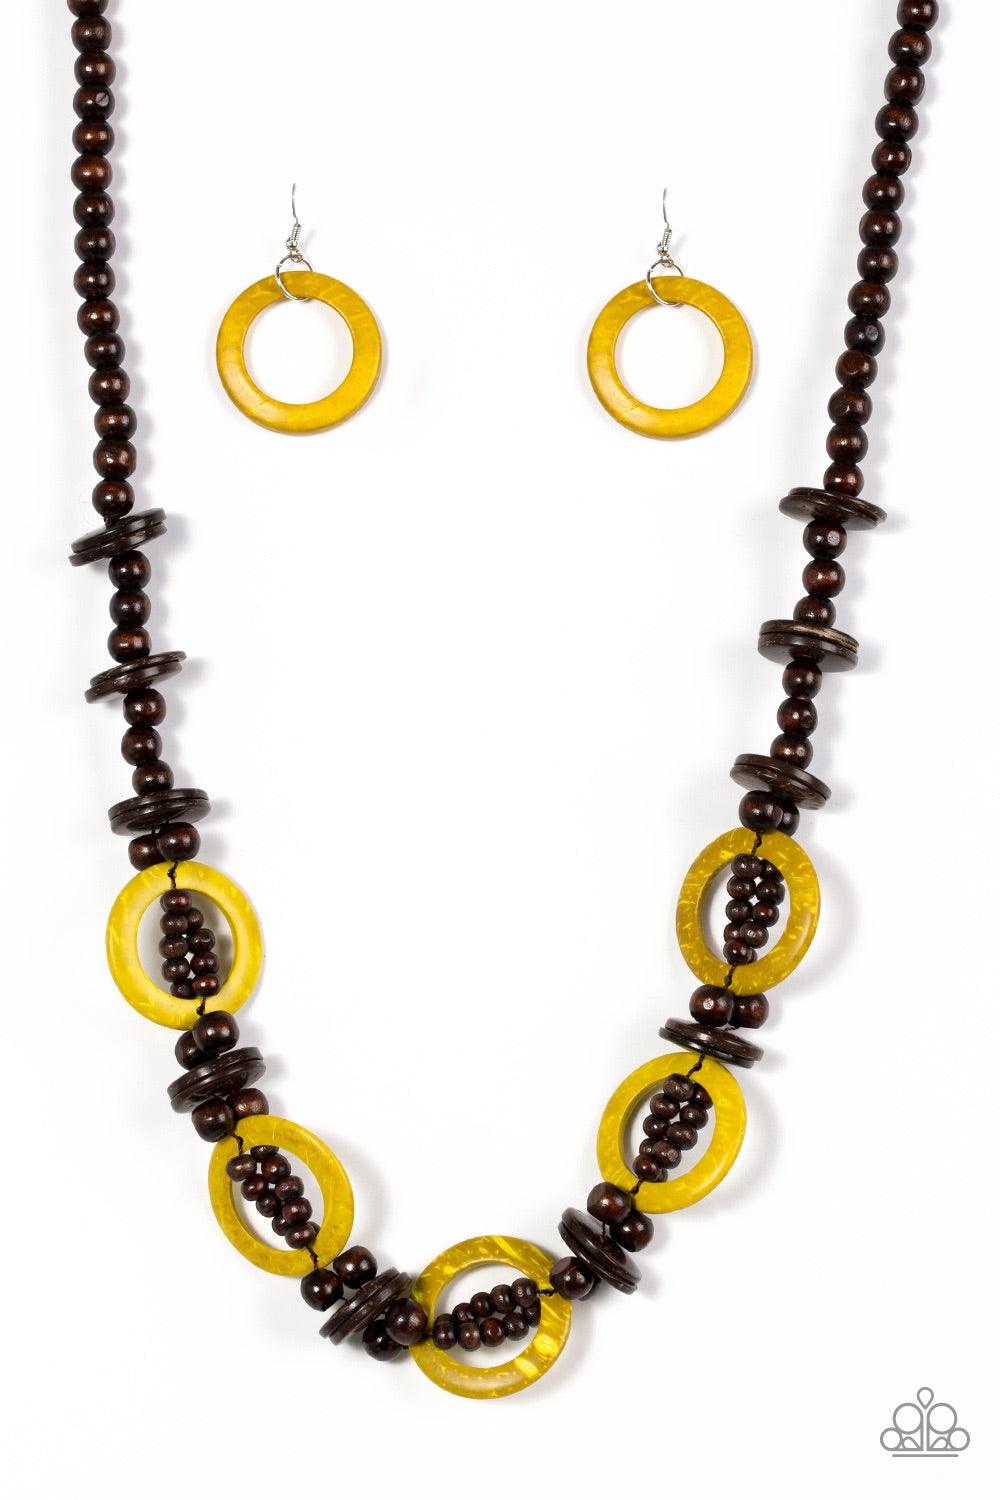 Paparazzi Accessories Fiji Foxtrot - Yellow Mismatched brown wooden beads are threaded along a brown cord for an earthy look. Sunny yellow wooden discs connect with beaded links across the chest for a summery finish. Jewelry